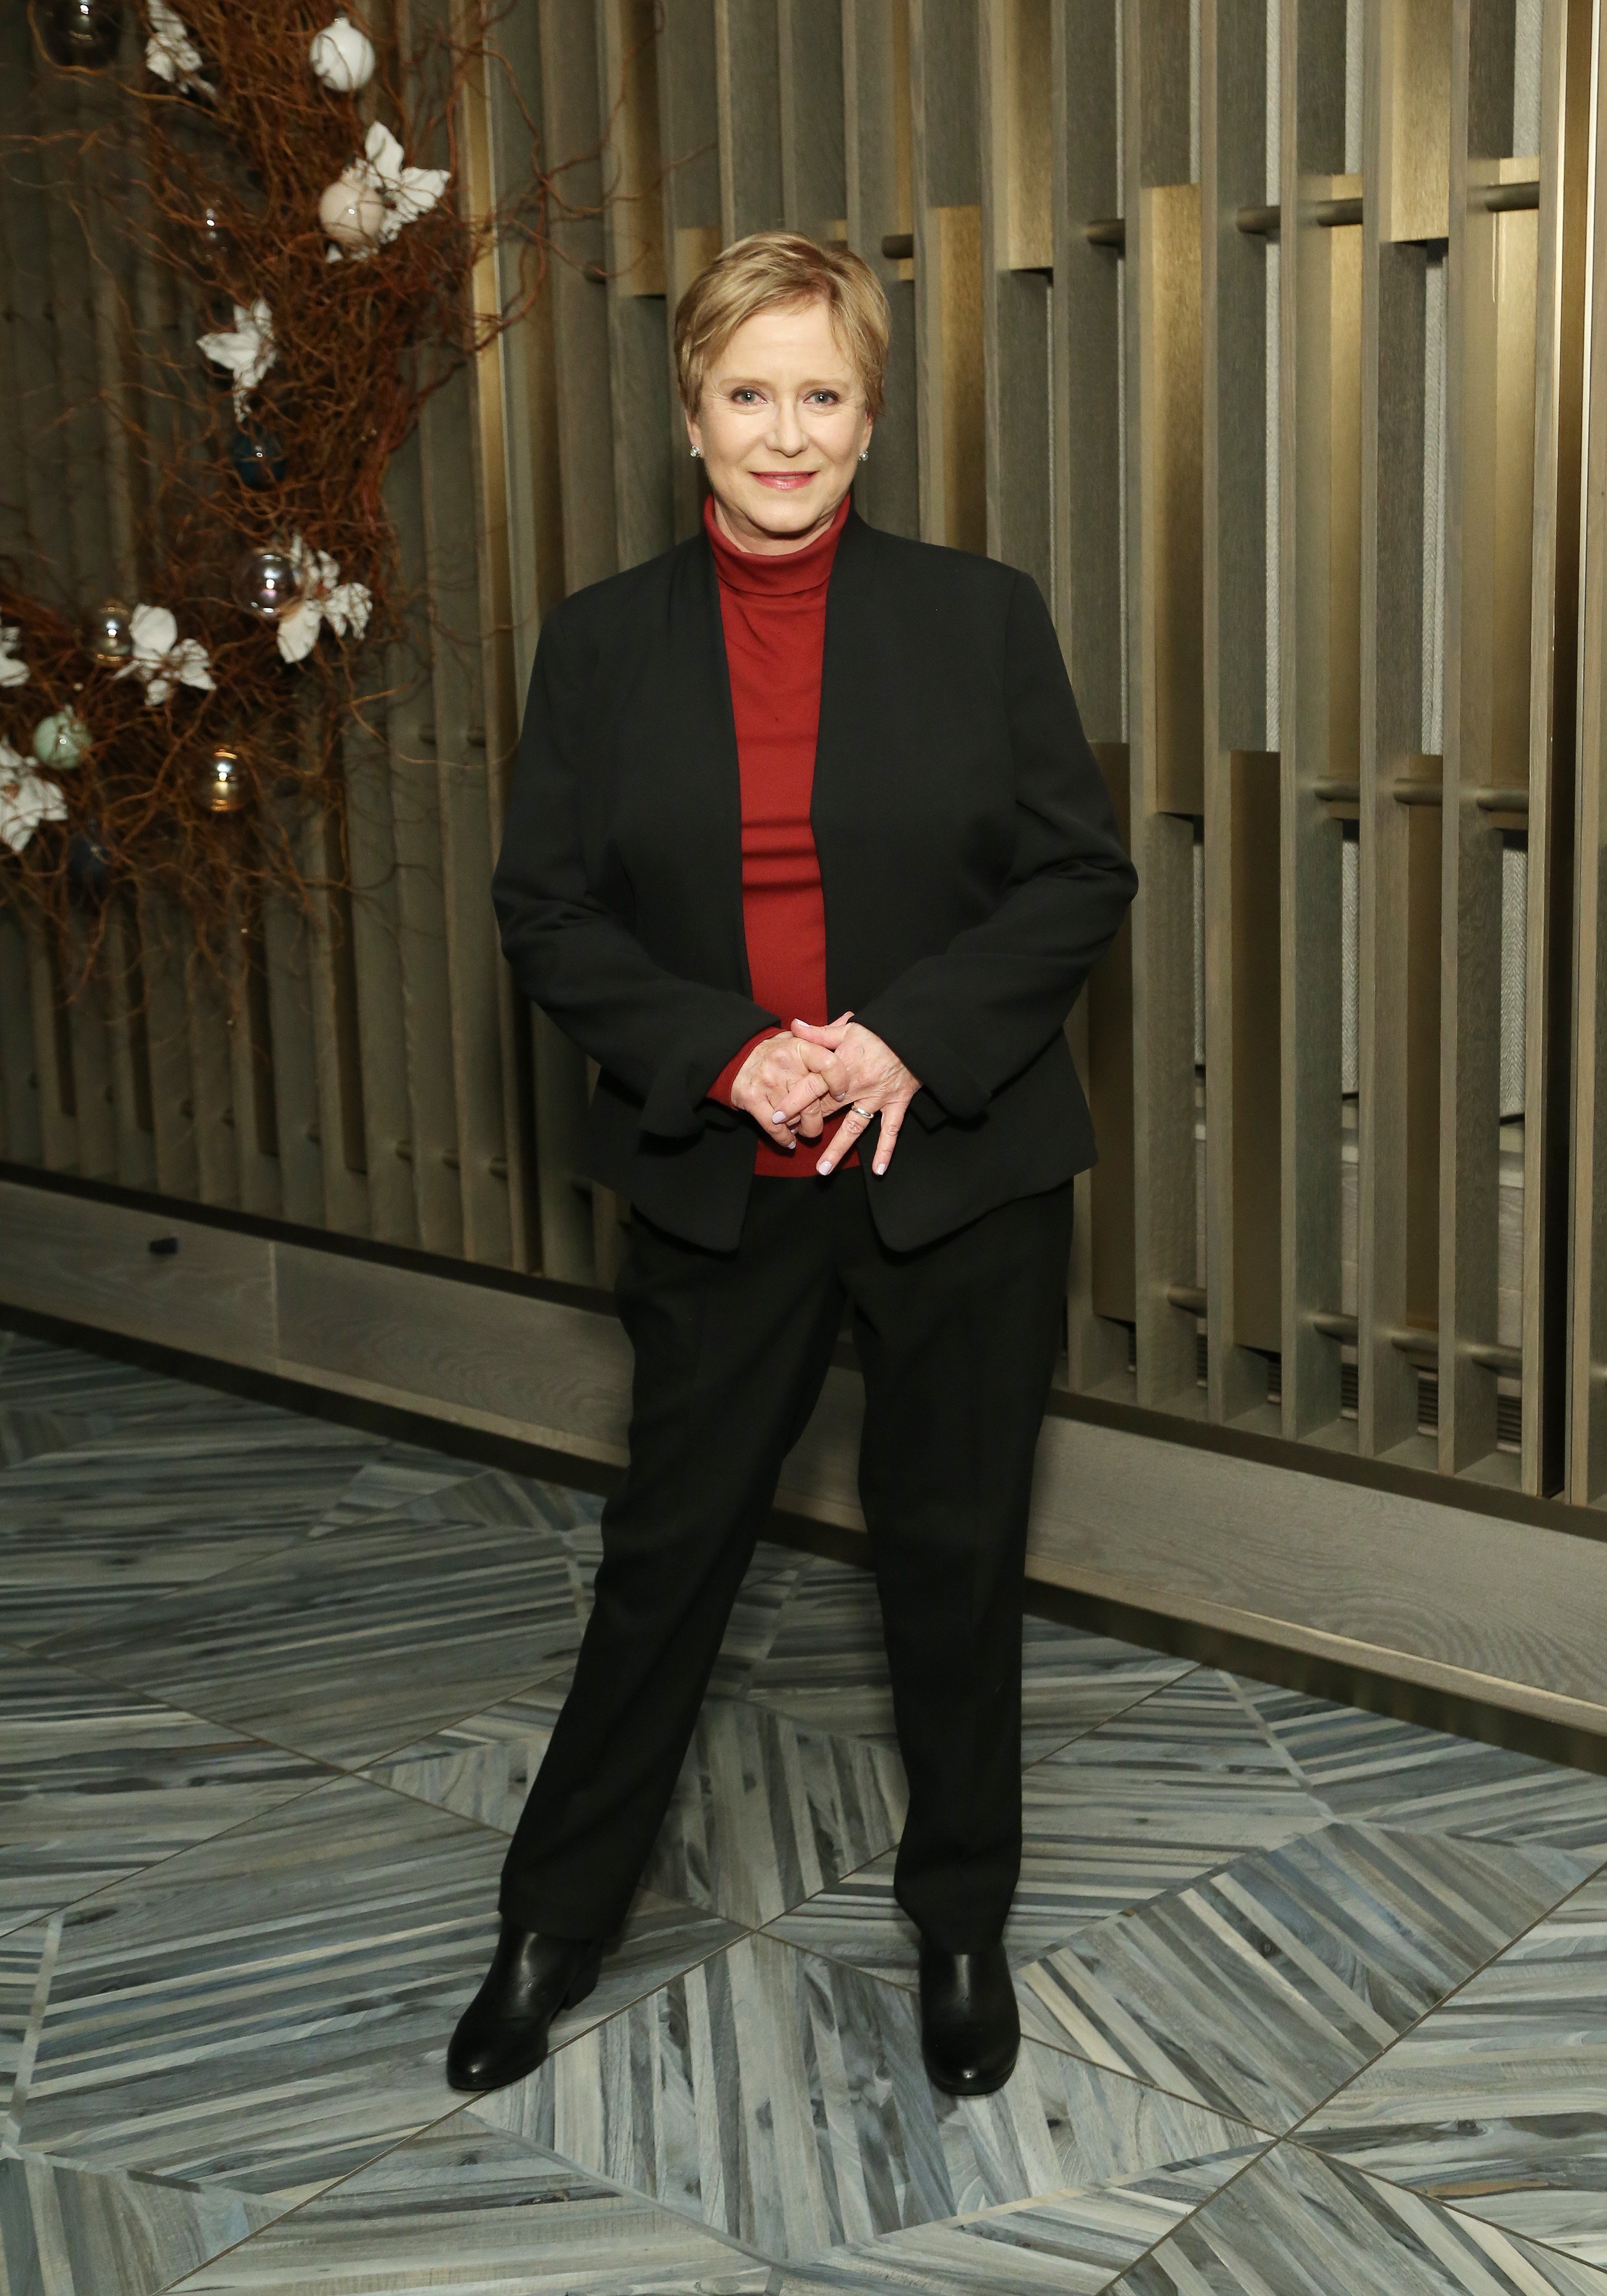 Eve Plumb attends the Cinema Society's special screening of Togo at iPic Fulton Market on December 09, 2019, in New York City. | Source: Getty Images.